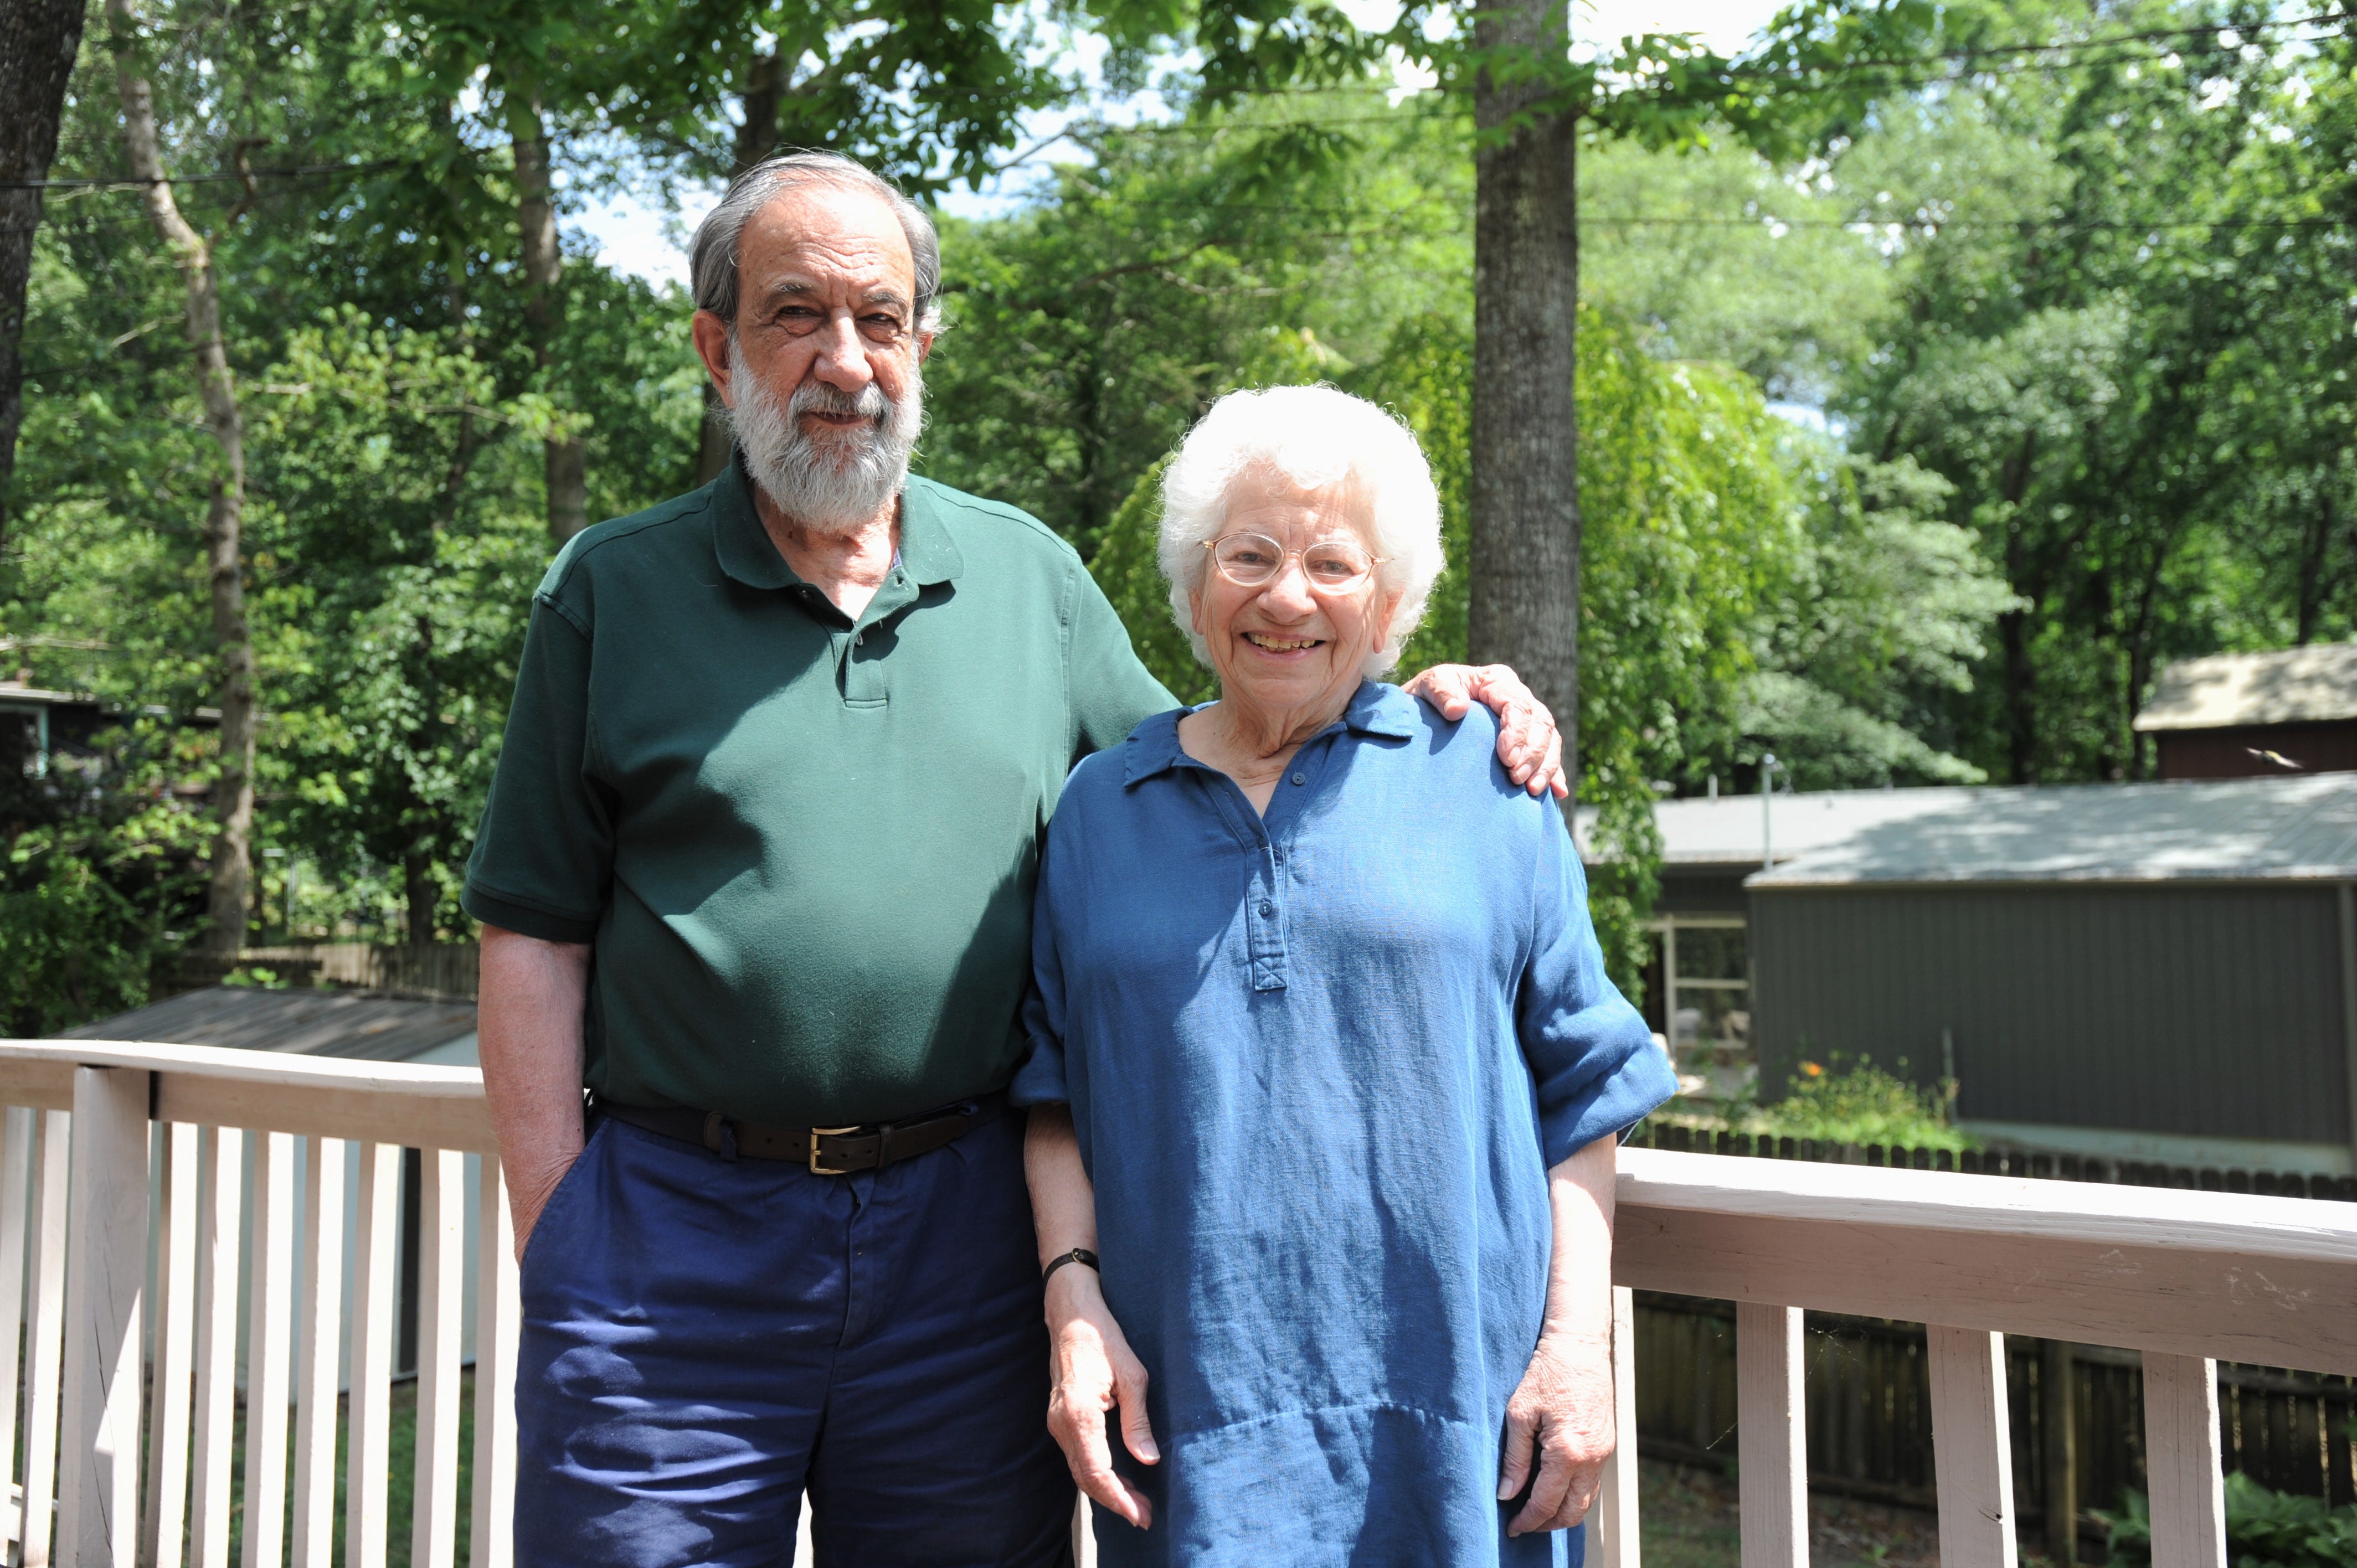 David Kherdian and Nonny Hogrogian have published more than 150 books between them. On June 6, the couple will hold a reading at the library in their new hometown of Black Mountain.